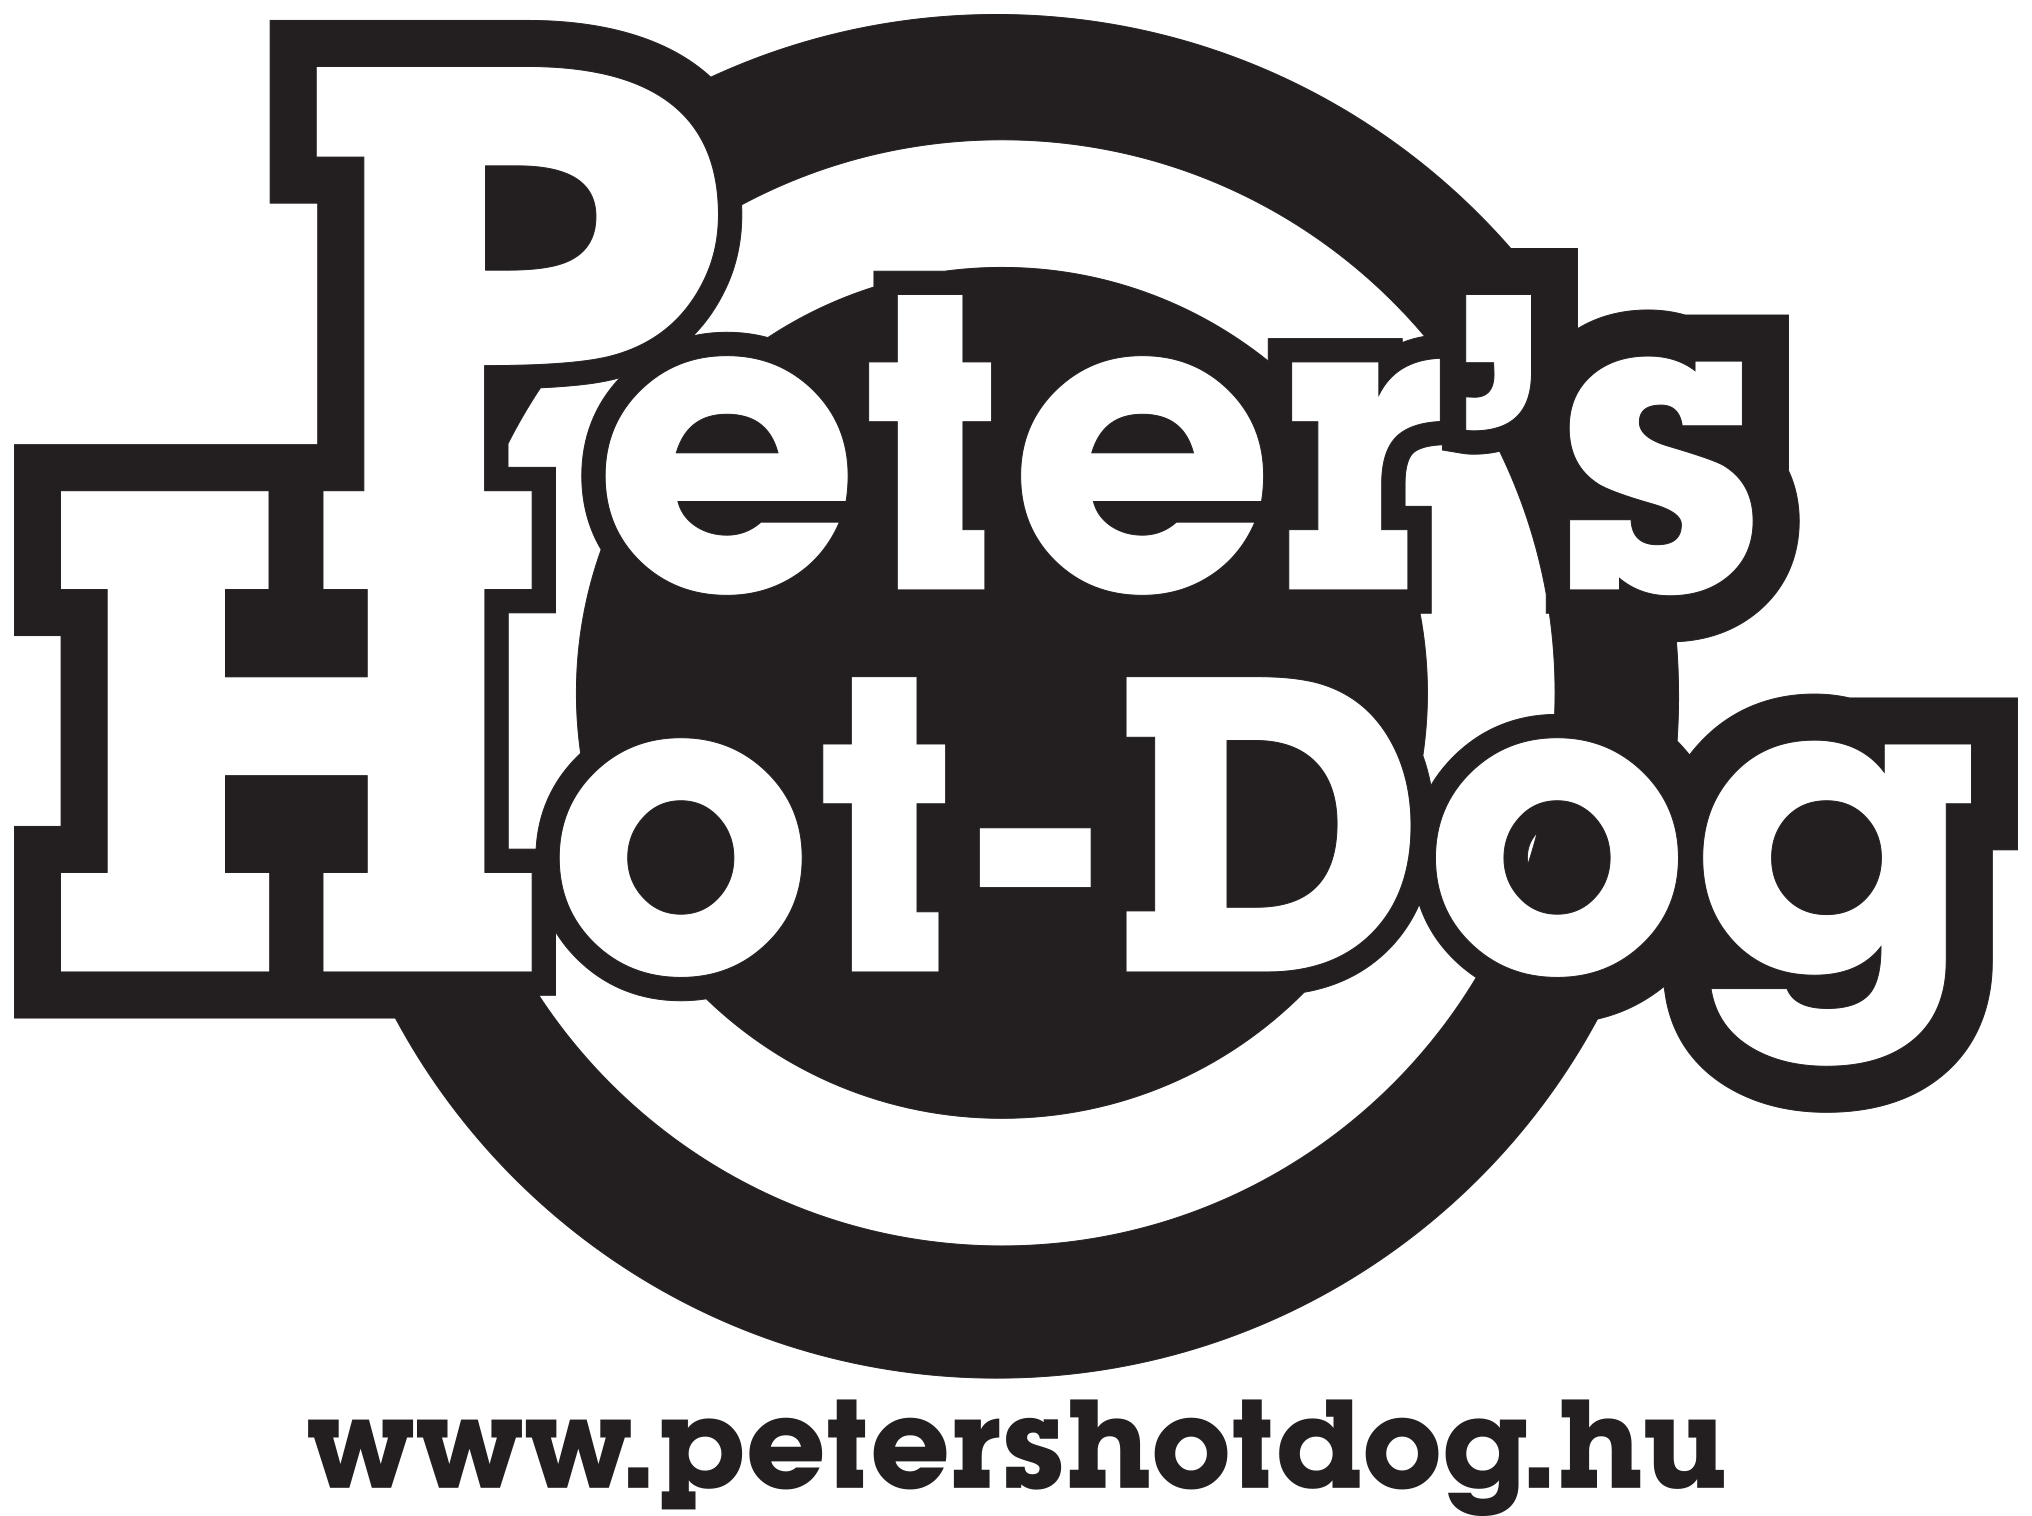 Peters Hot-dog